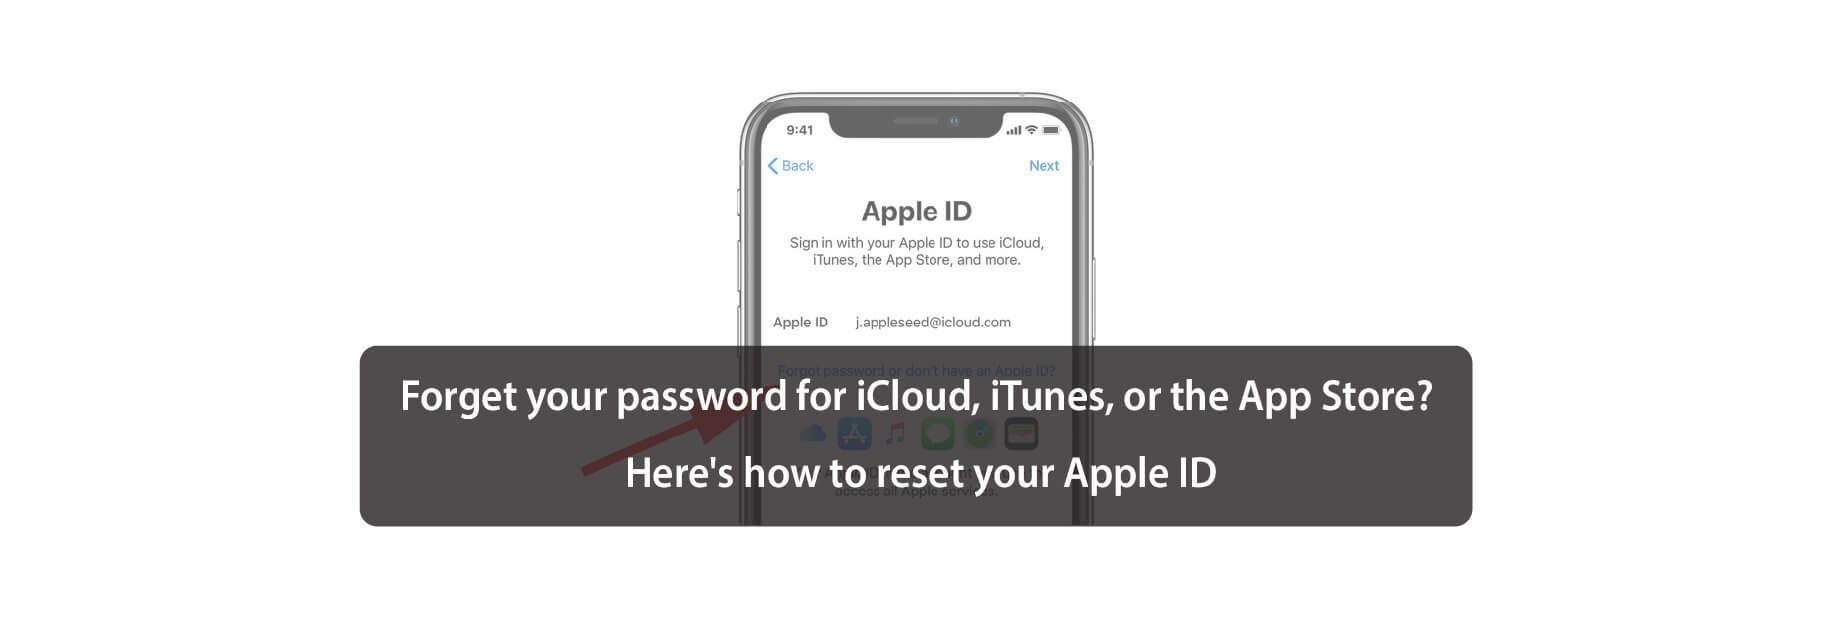 Forget your password for iCloud, iTunes, or the App Store? Here's how to reset your Apple ID